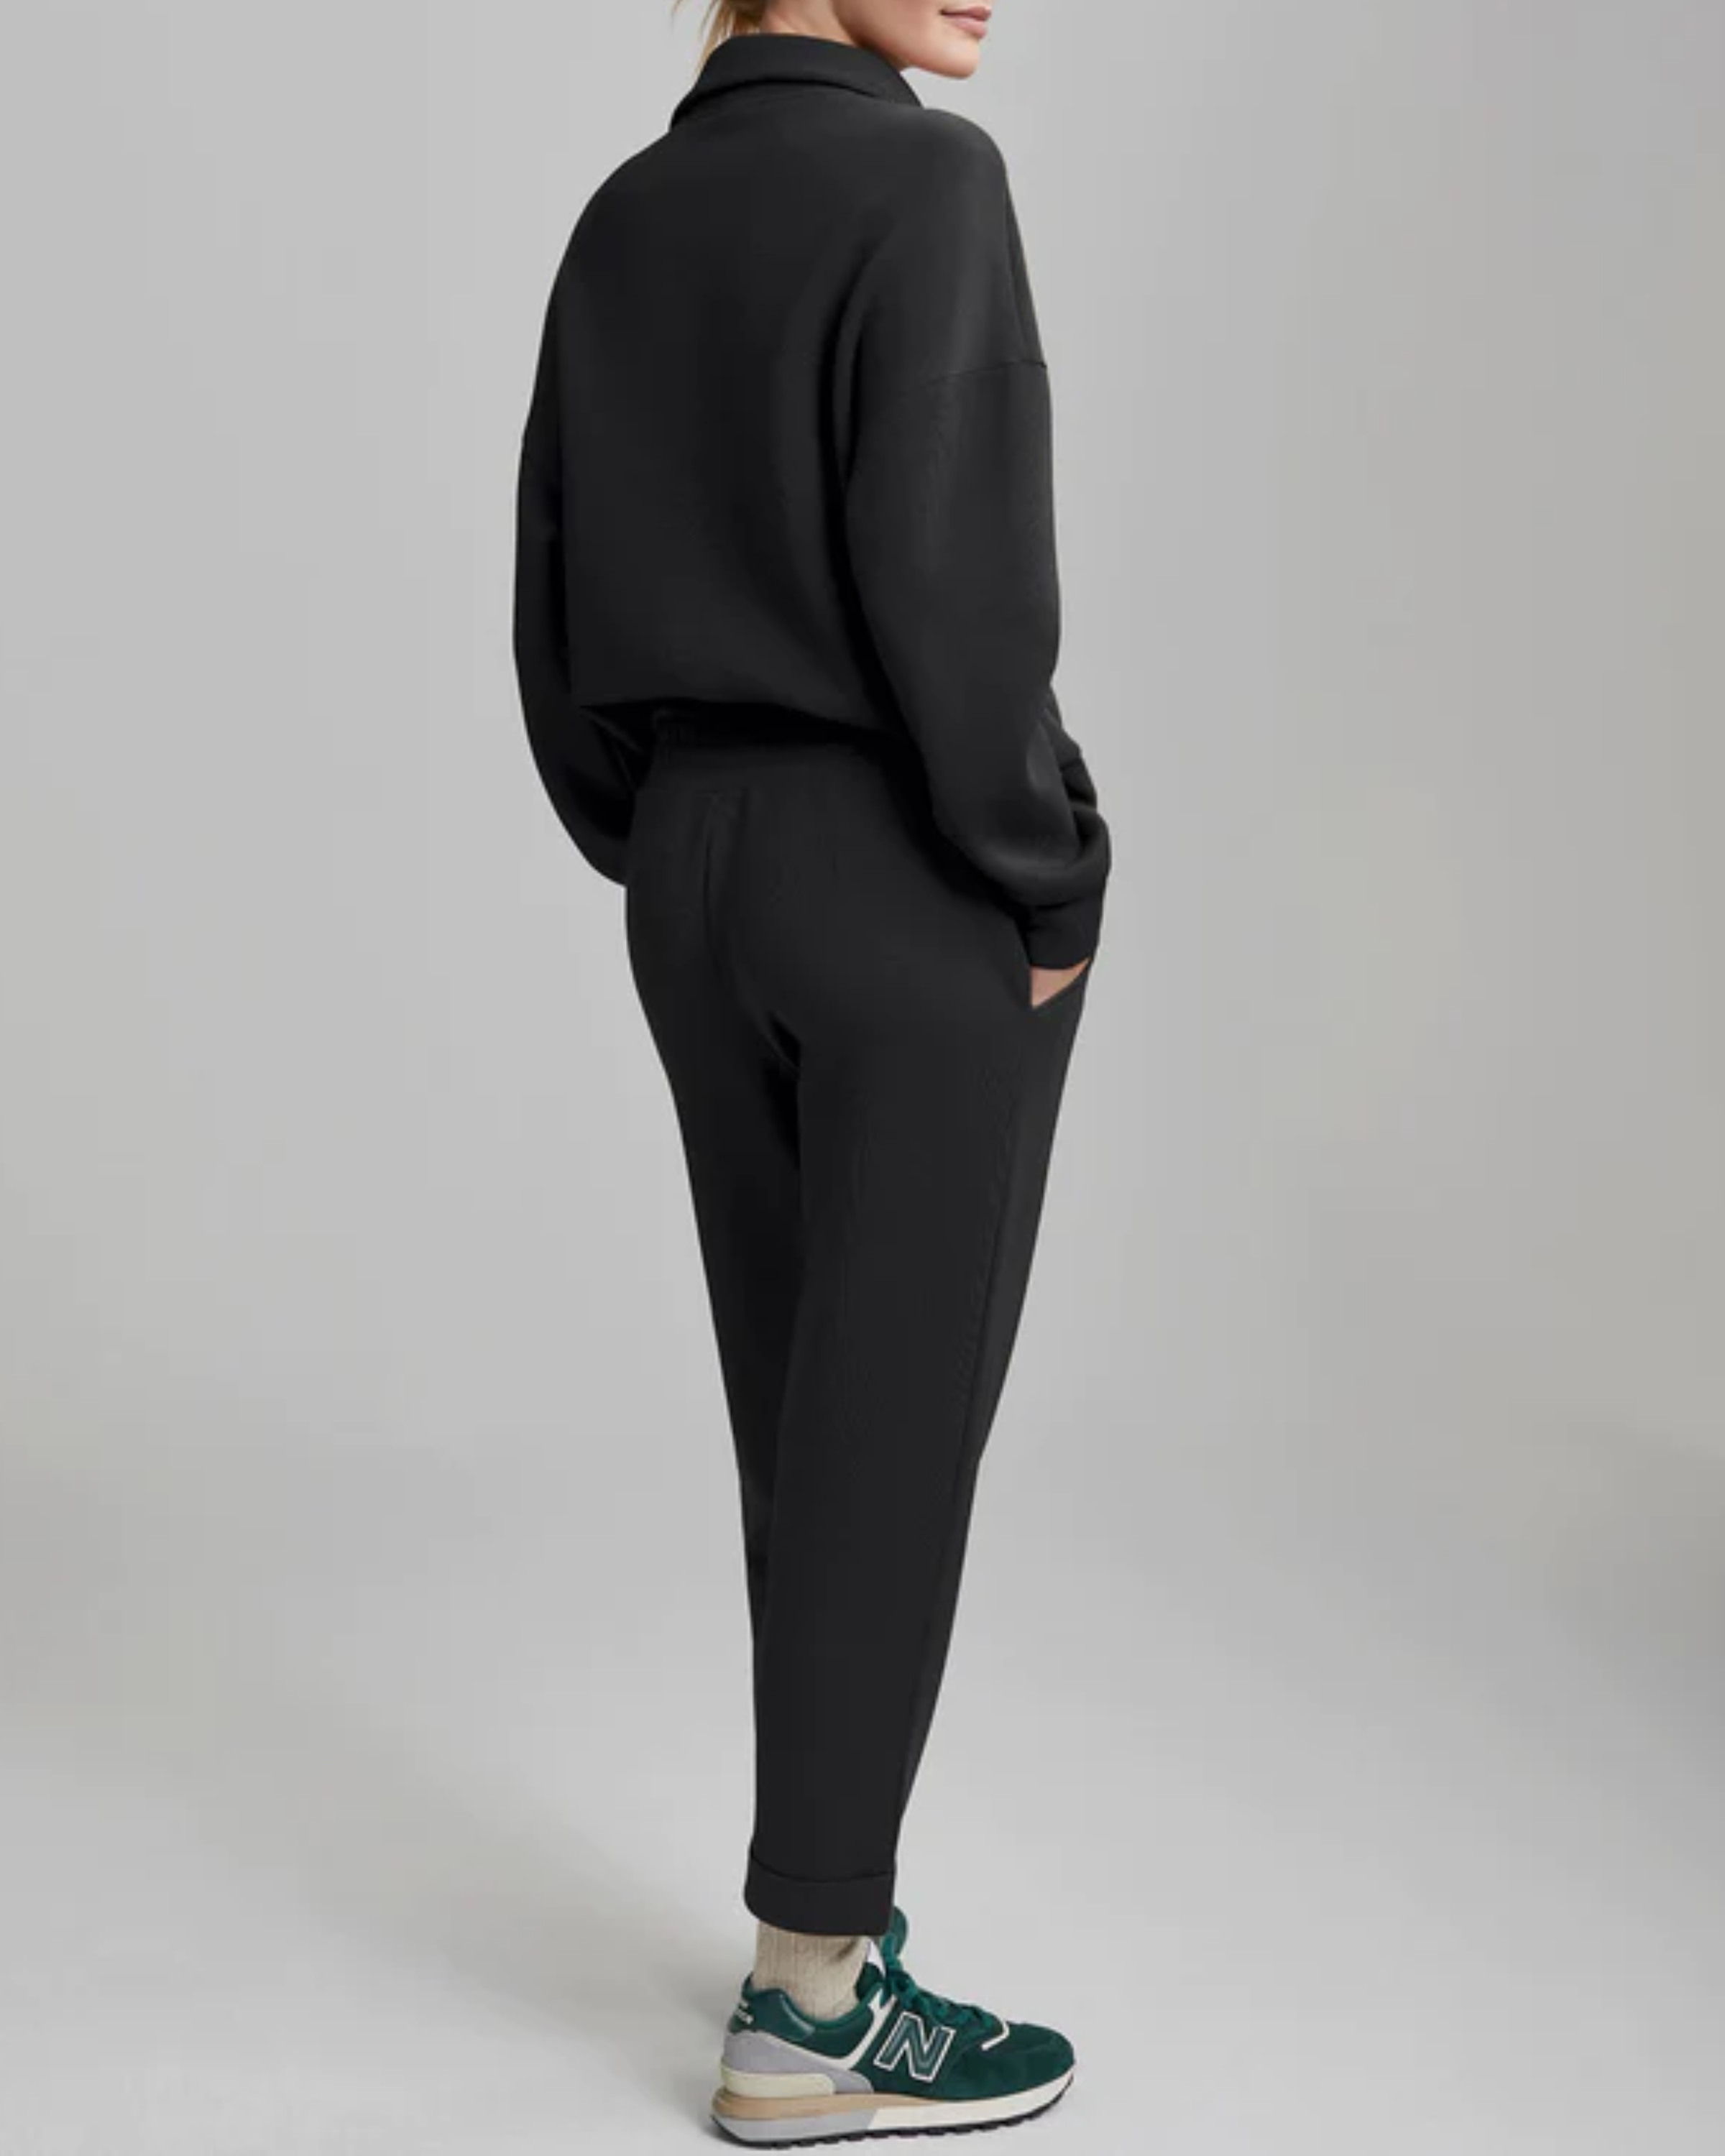 Varley Rolled Cuff Pant in Black